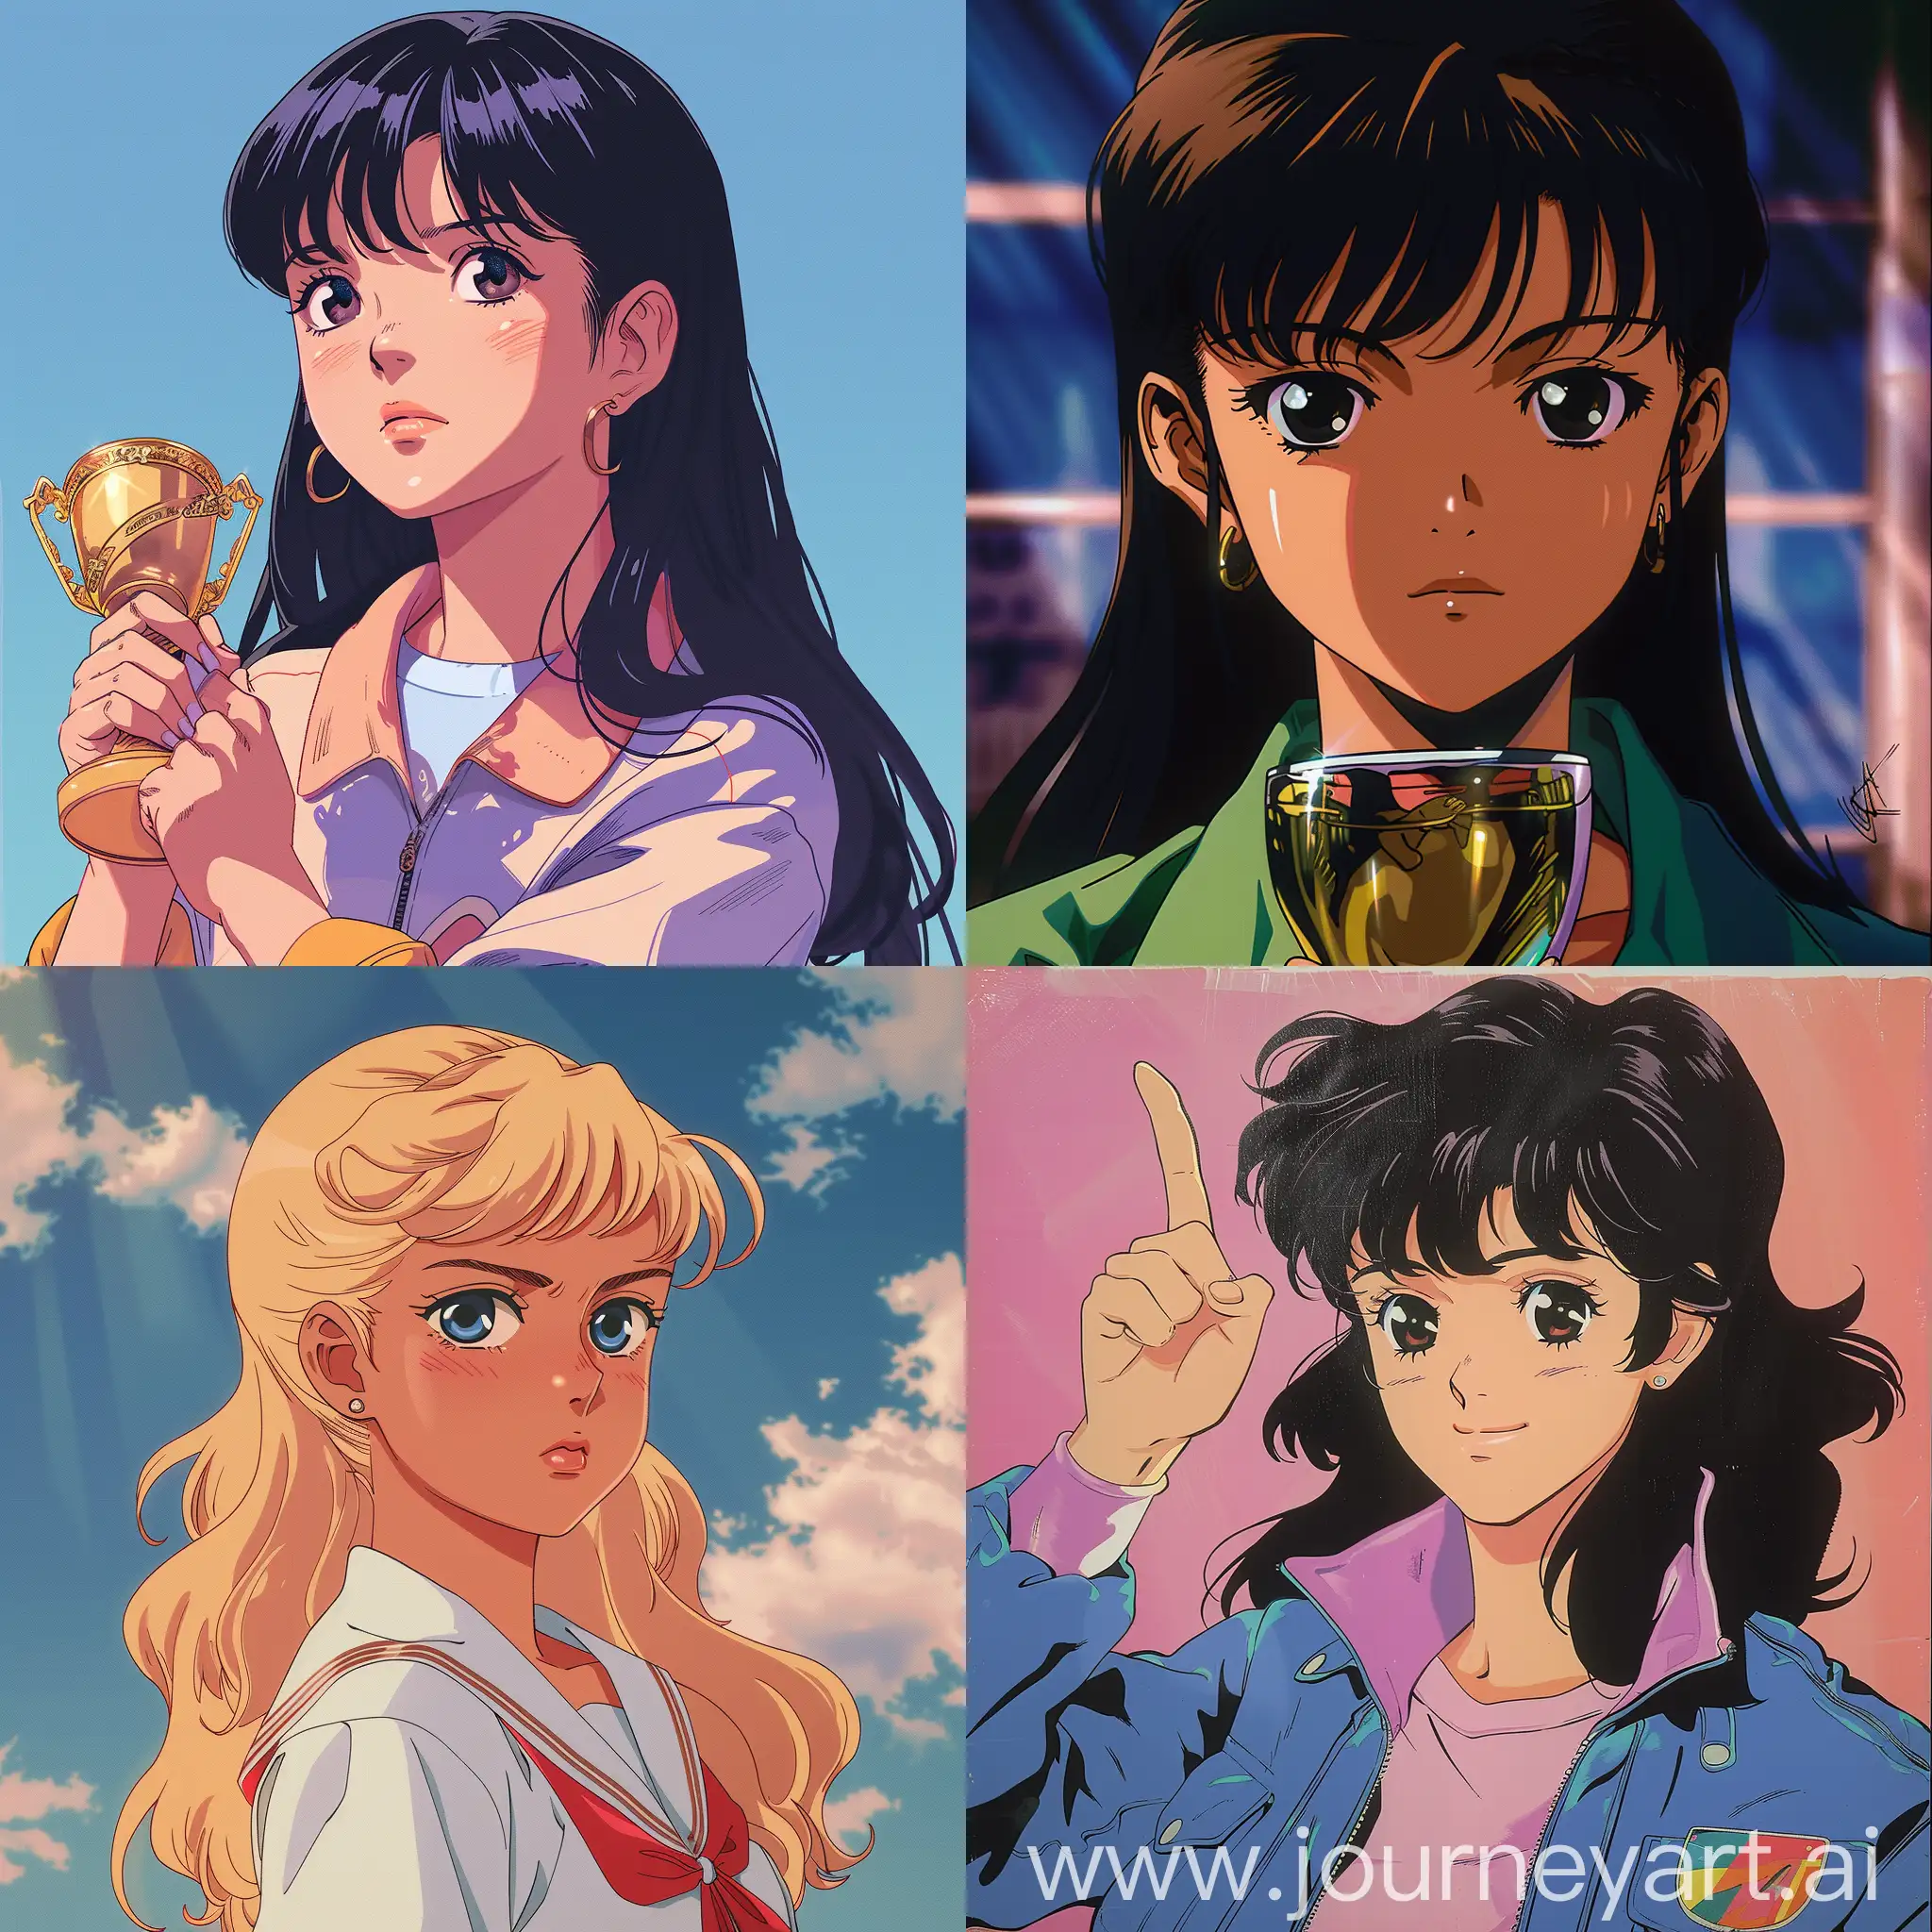 Champion-in-1980s-Anime-Style